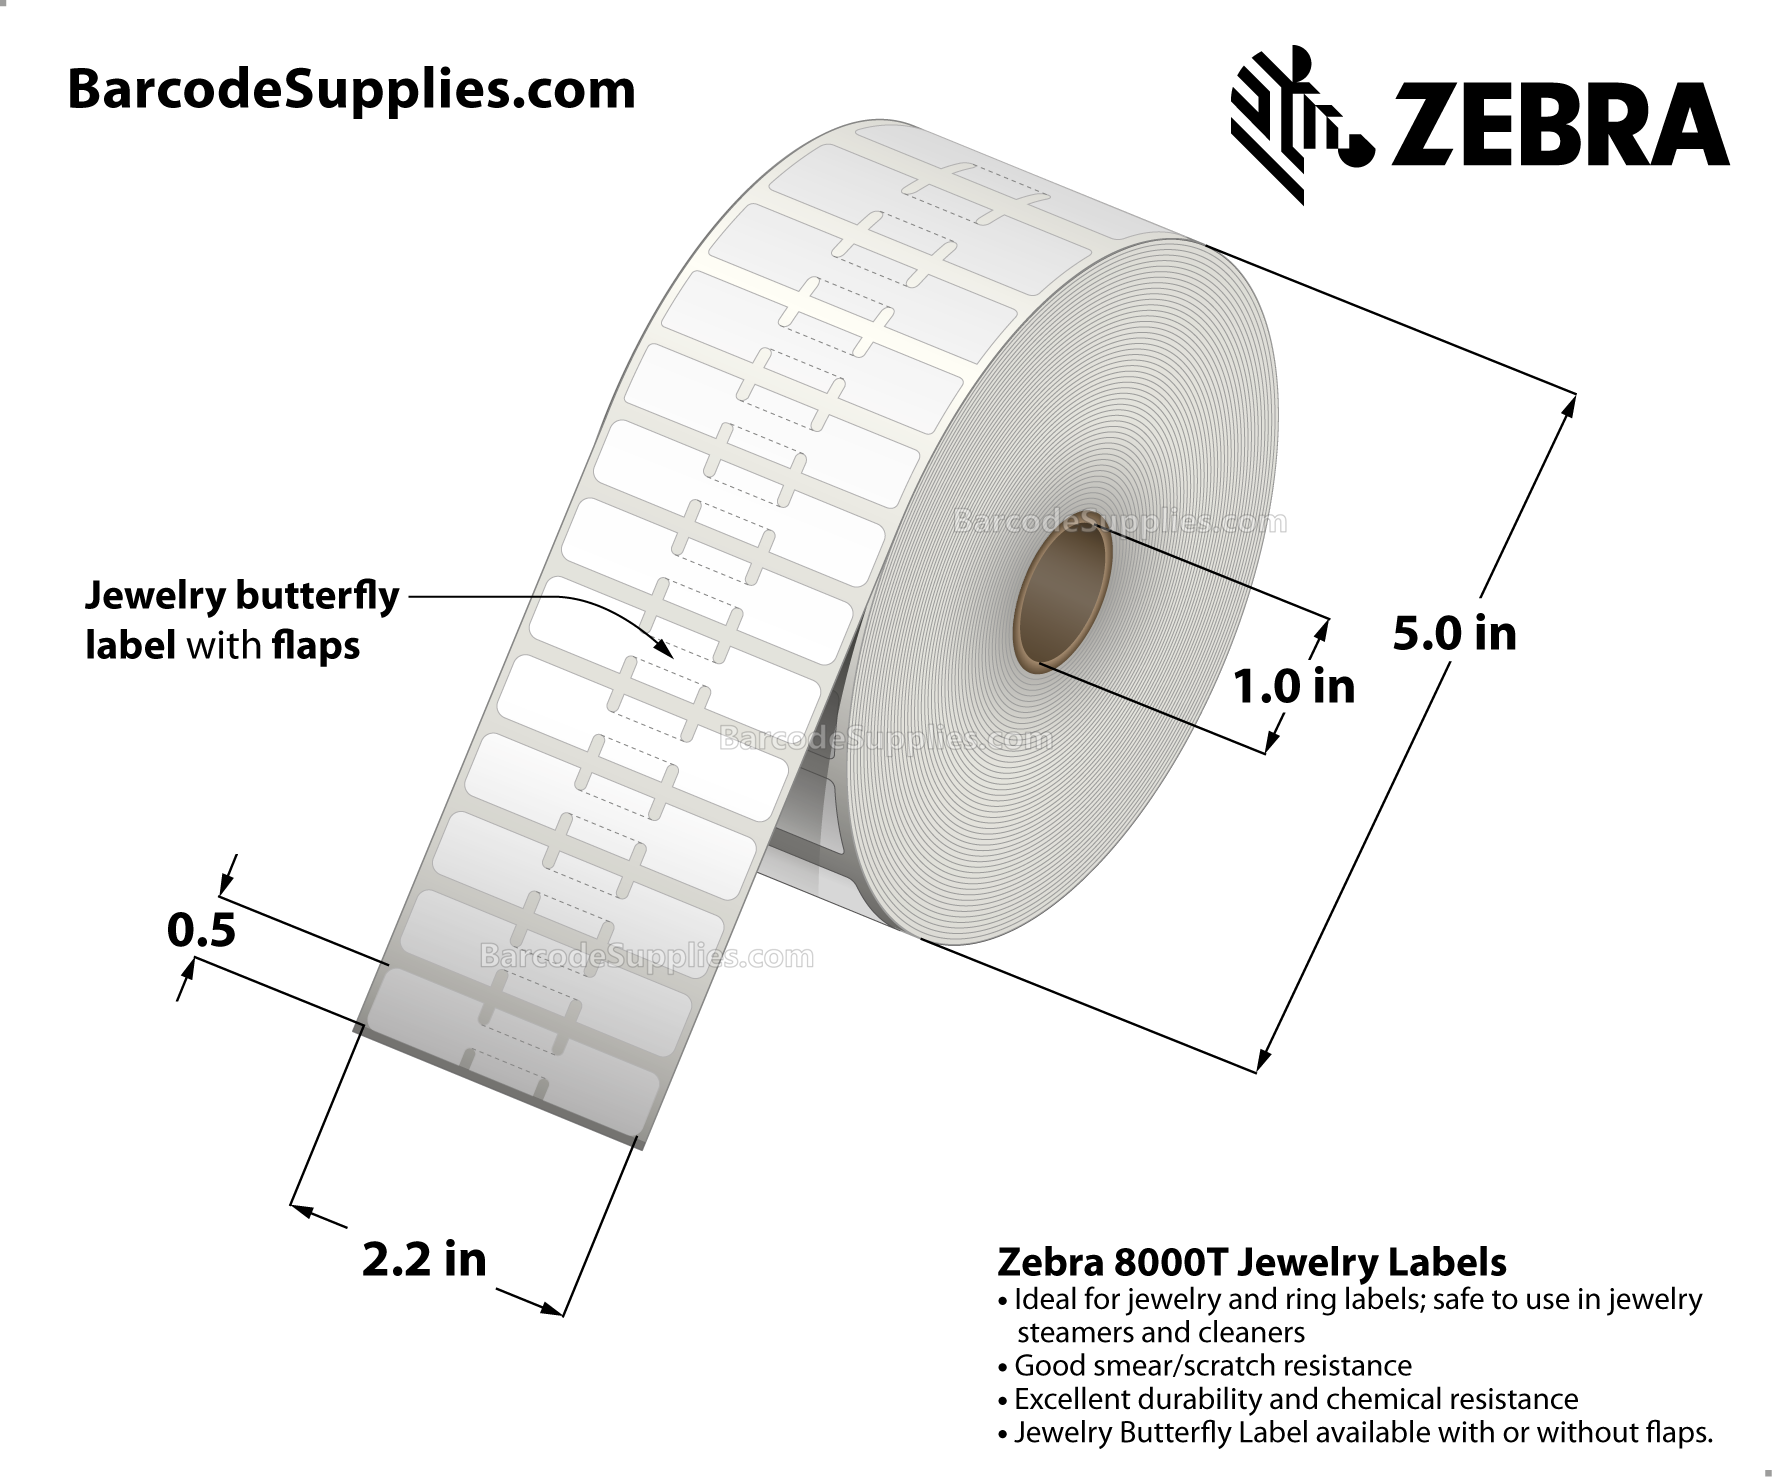 2.2 x 0.5 Thermal Transfer White 8000T Jewelry (Jewelry Butterfly Label with flaps) Labels With Permanent Adhesive - Not Perforated - 3510 Labels Per Roll - Carton Of 6 Rolls - 21060 Labels Total - MPN: 10010067